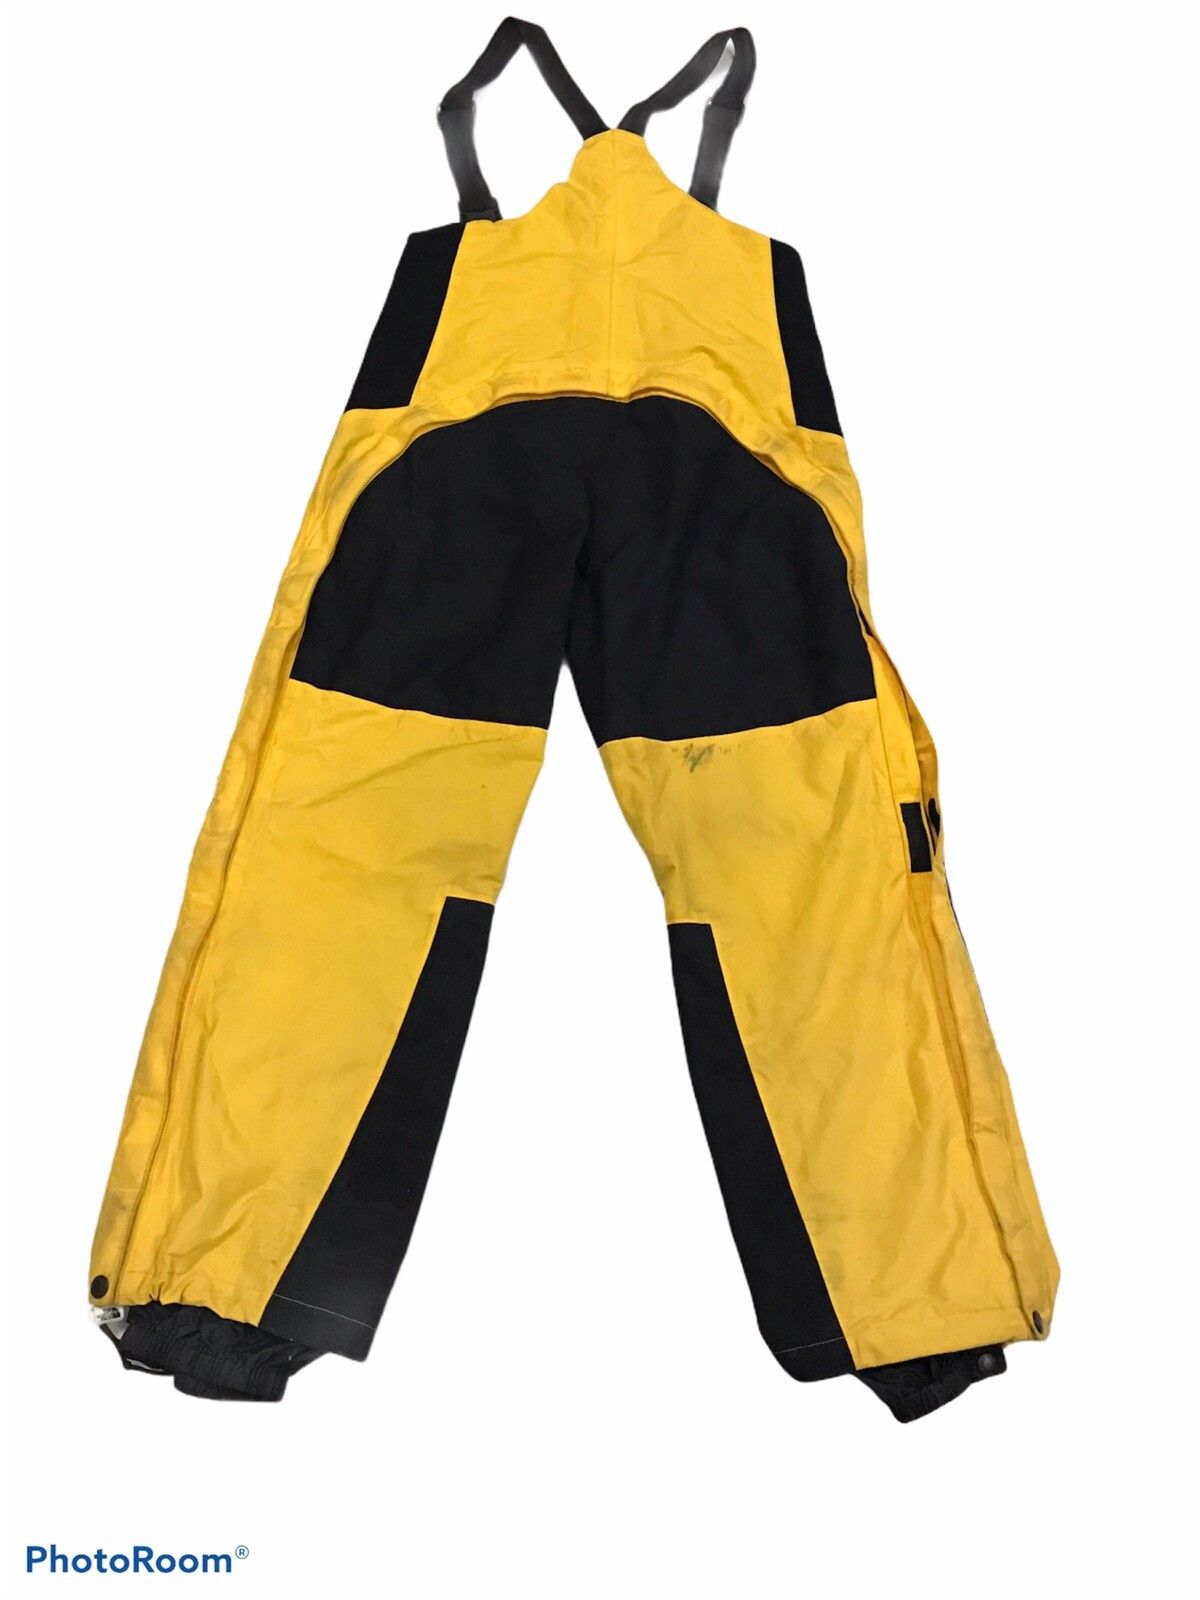 THE NORTH FACE” GORE-TEX SKI PANTS BIBS OVERALLS IN YELLOW - 4